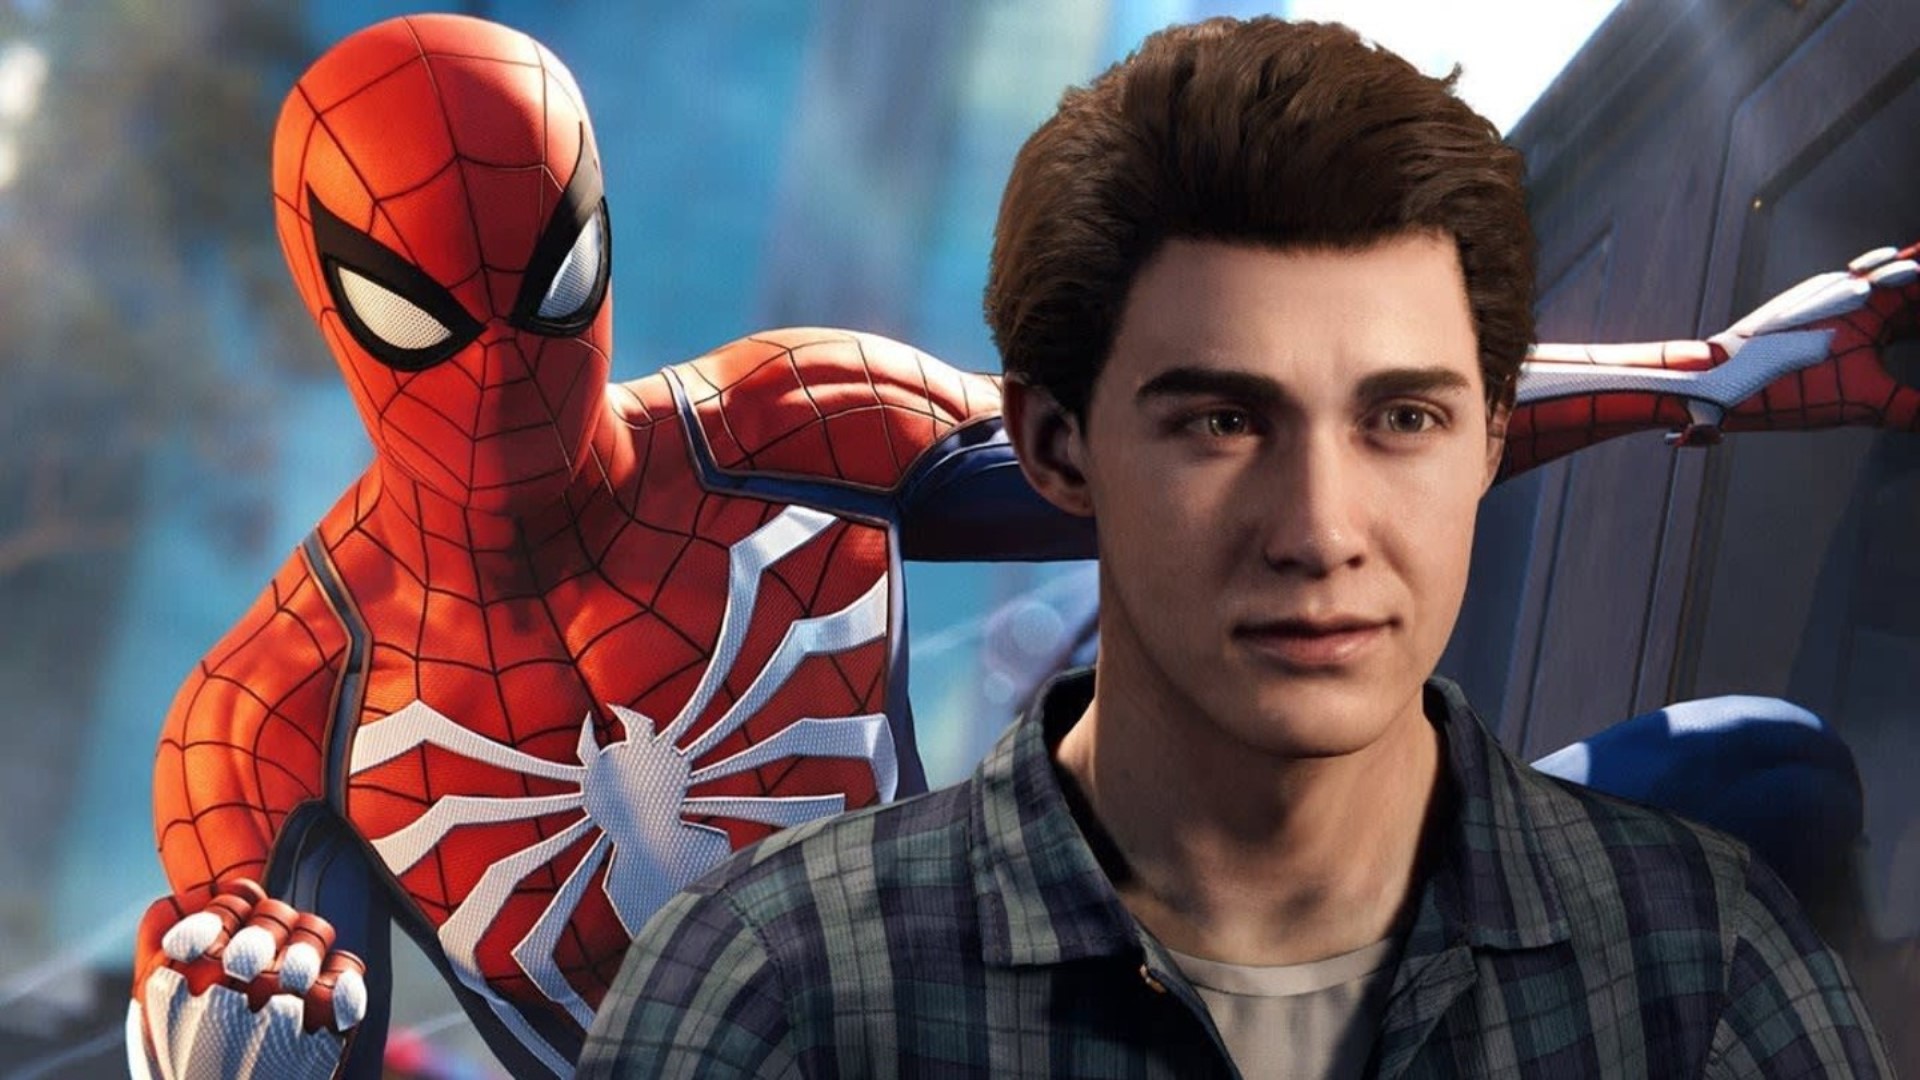 The first man game. Marvel Spider man Питер Паркер. Spider man 2018 Питер Паркер. Spider man 2 ps5 Питер Паркер. Spider man ps4 Питер Паркер.